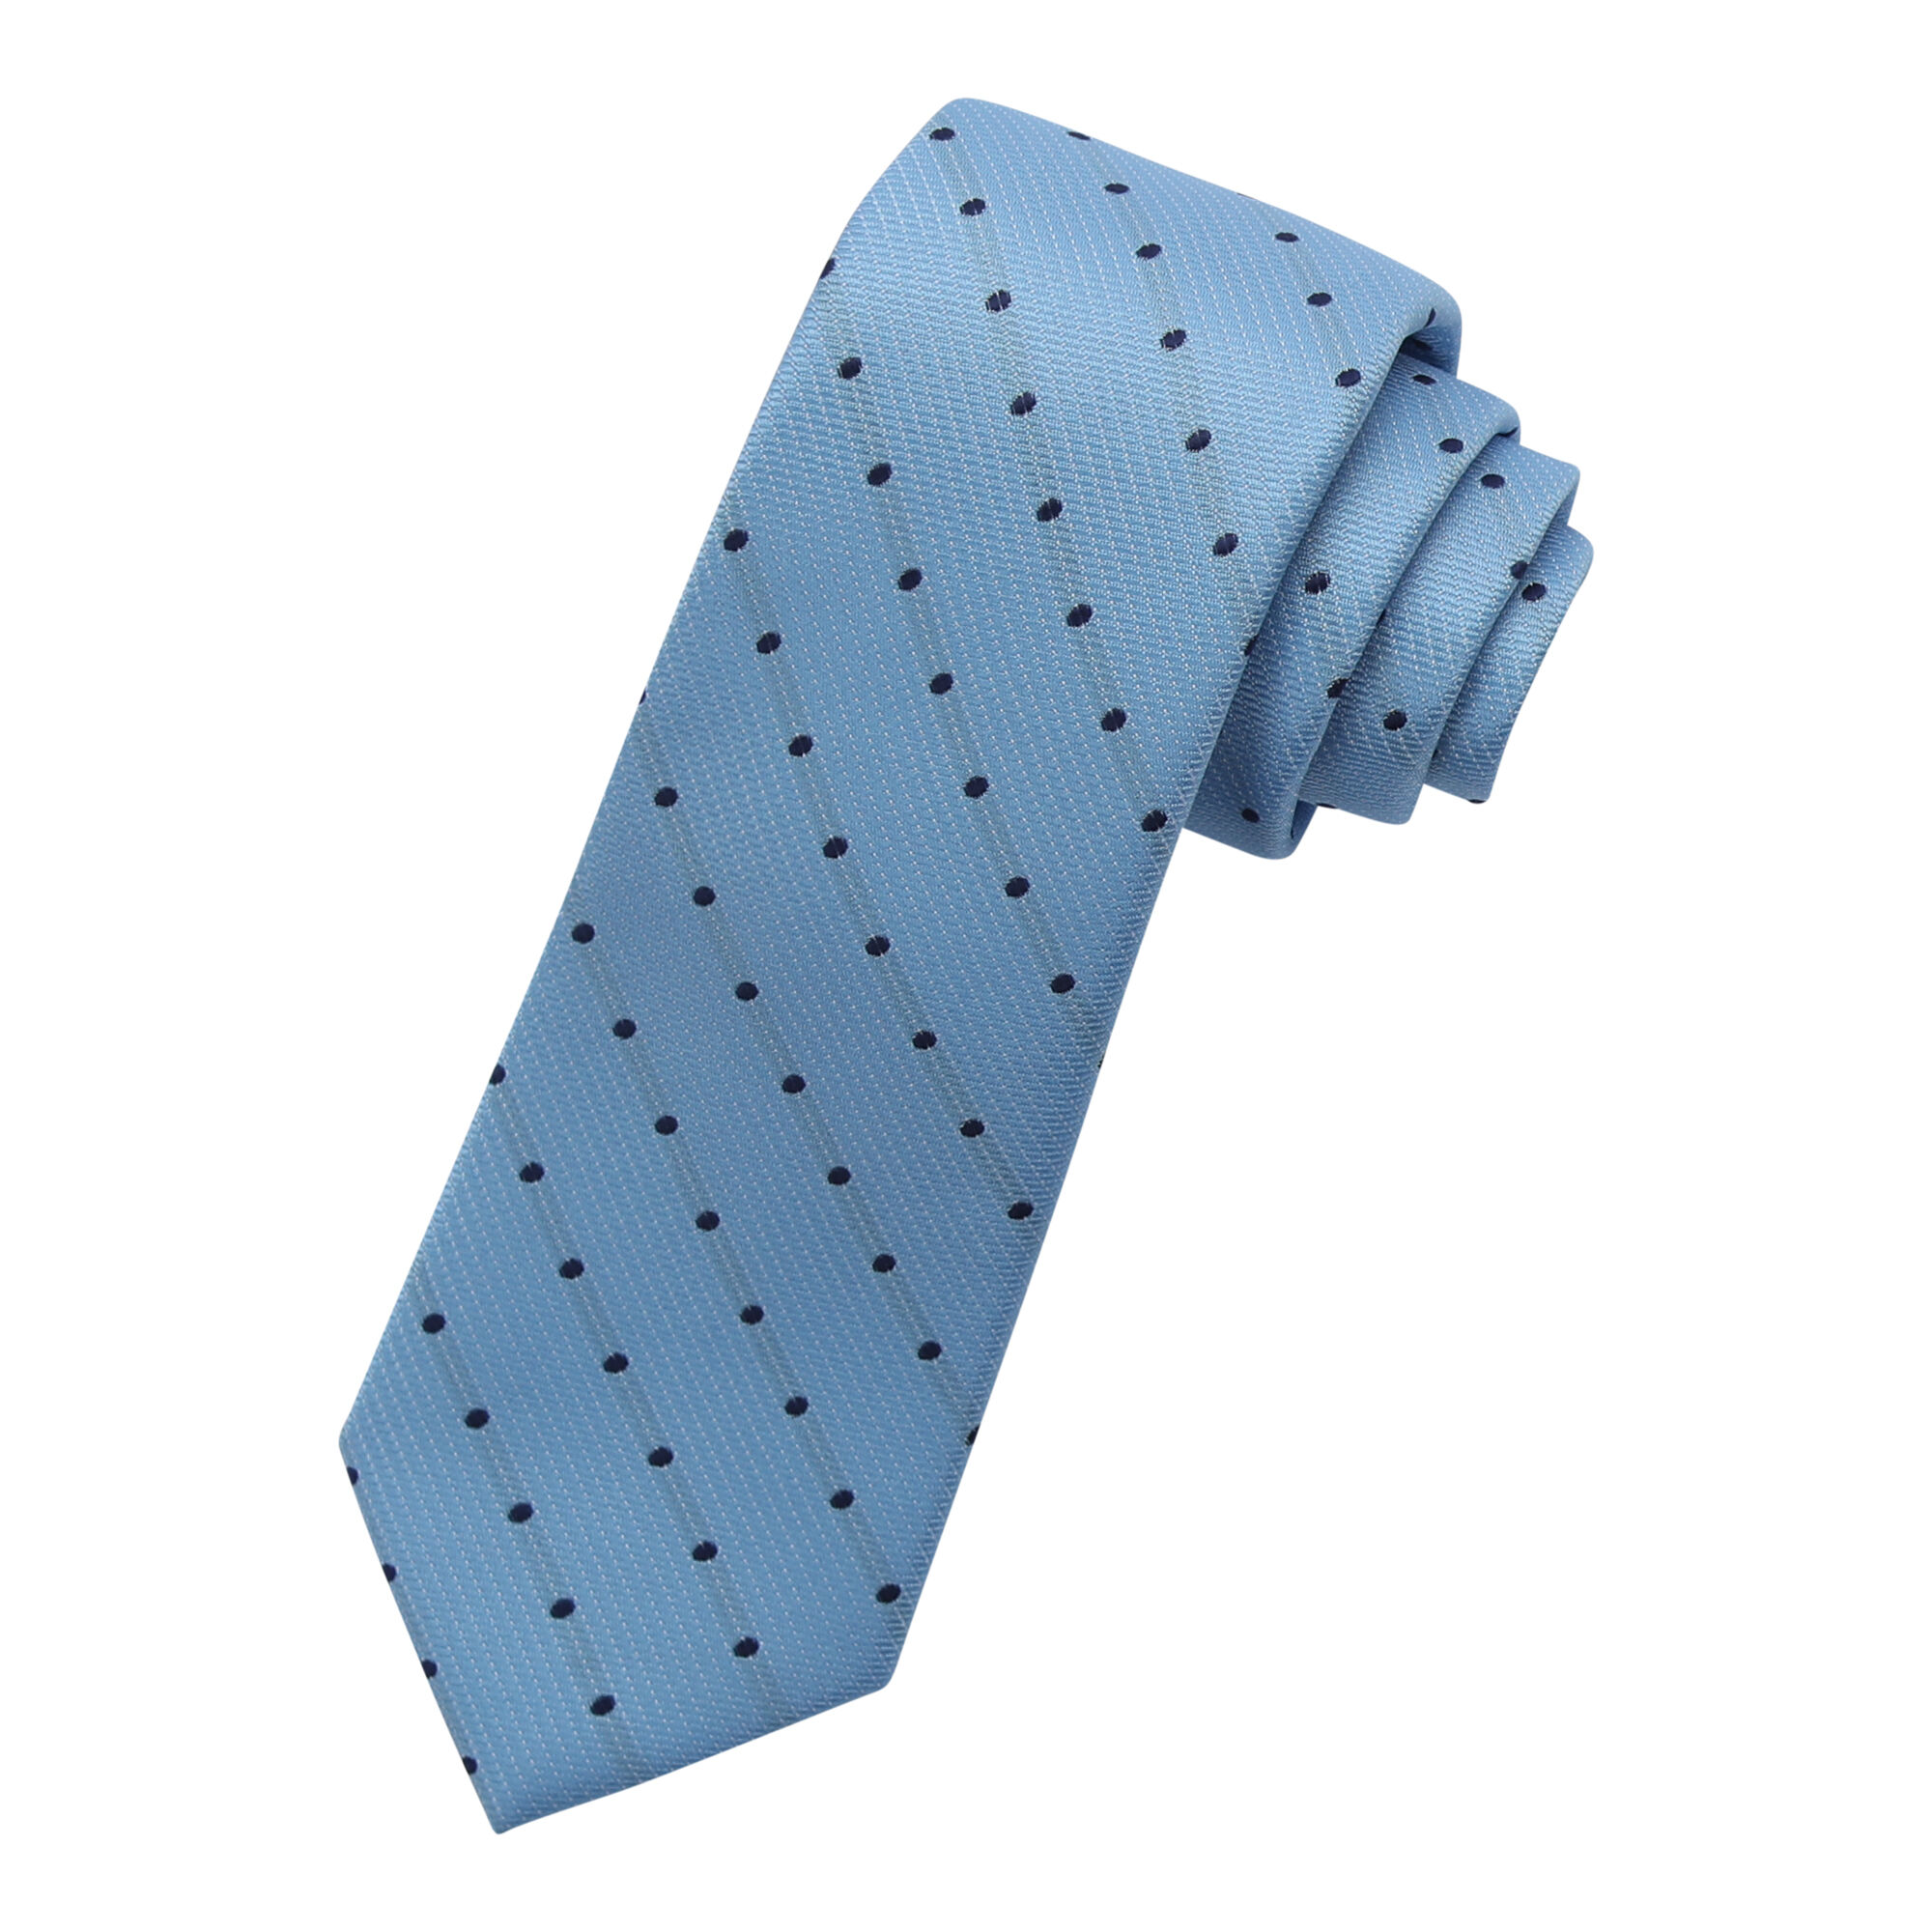 Haggar Dotted Tie Light Blue (2RC8-1041) photo